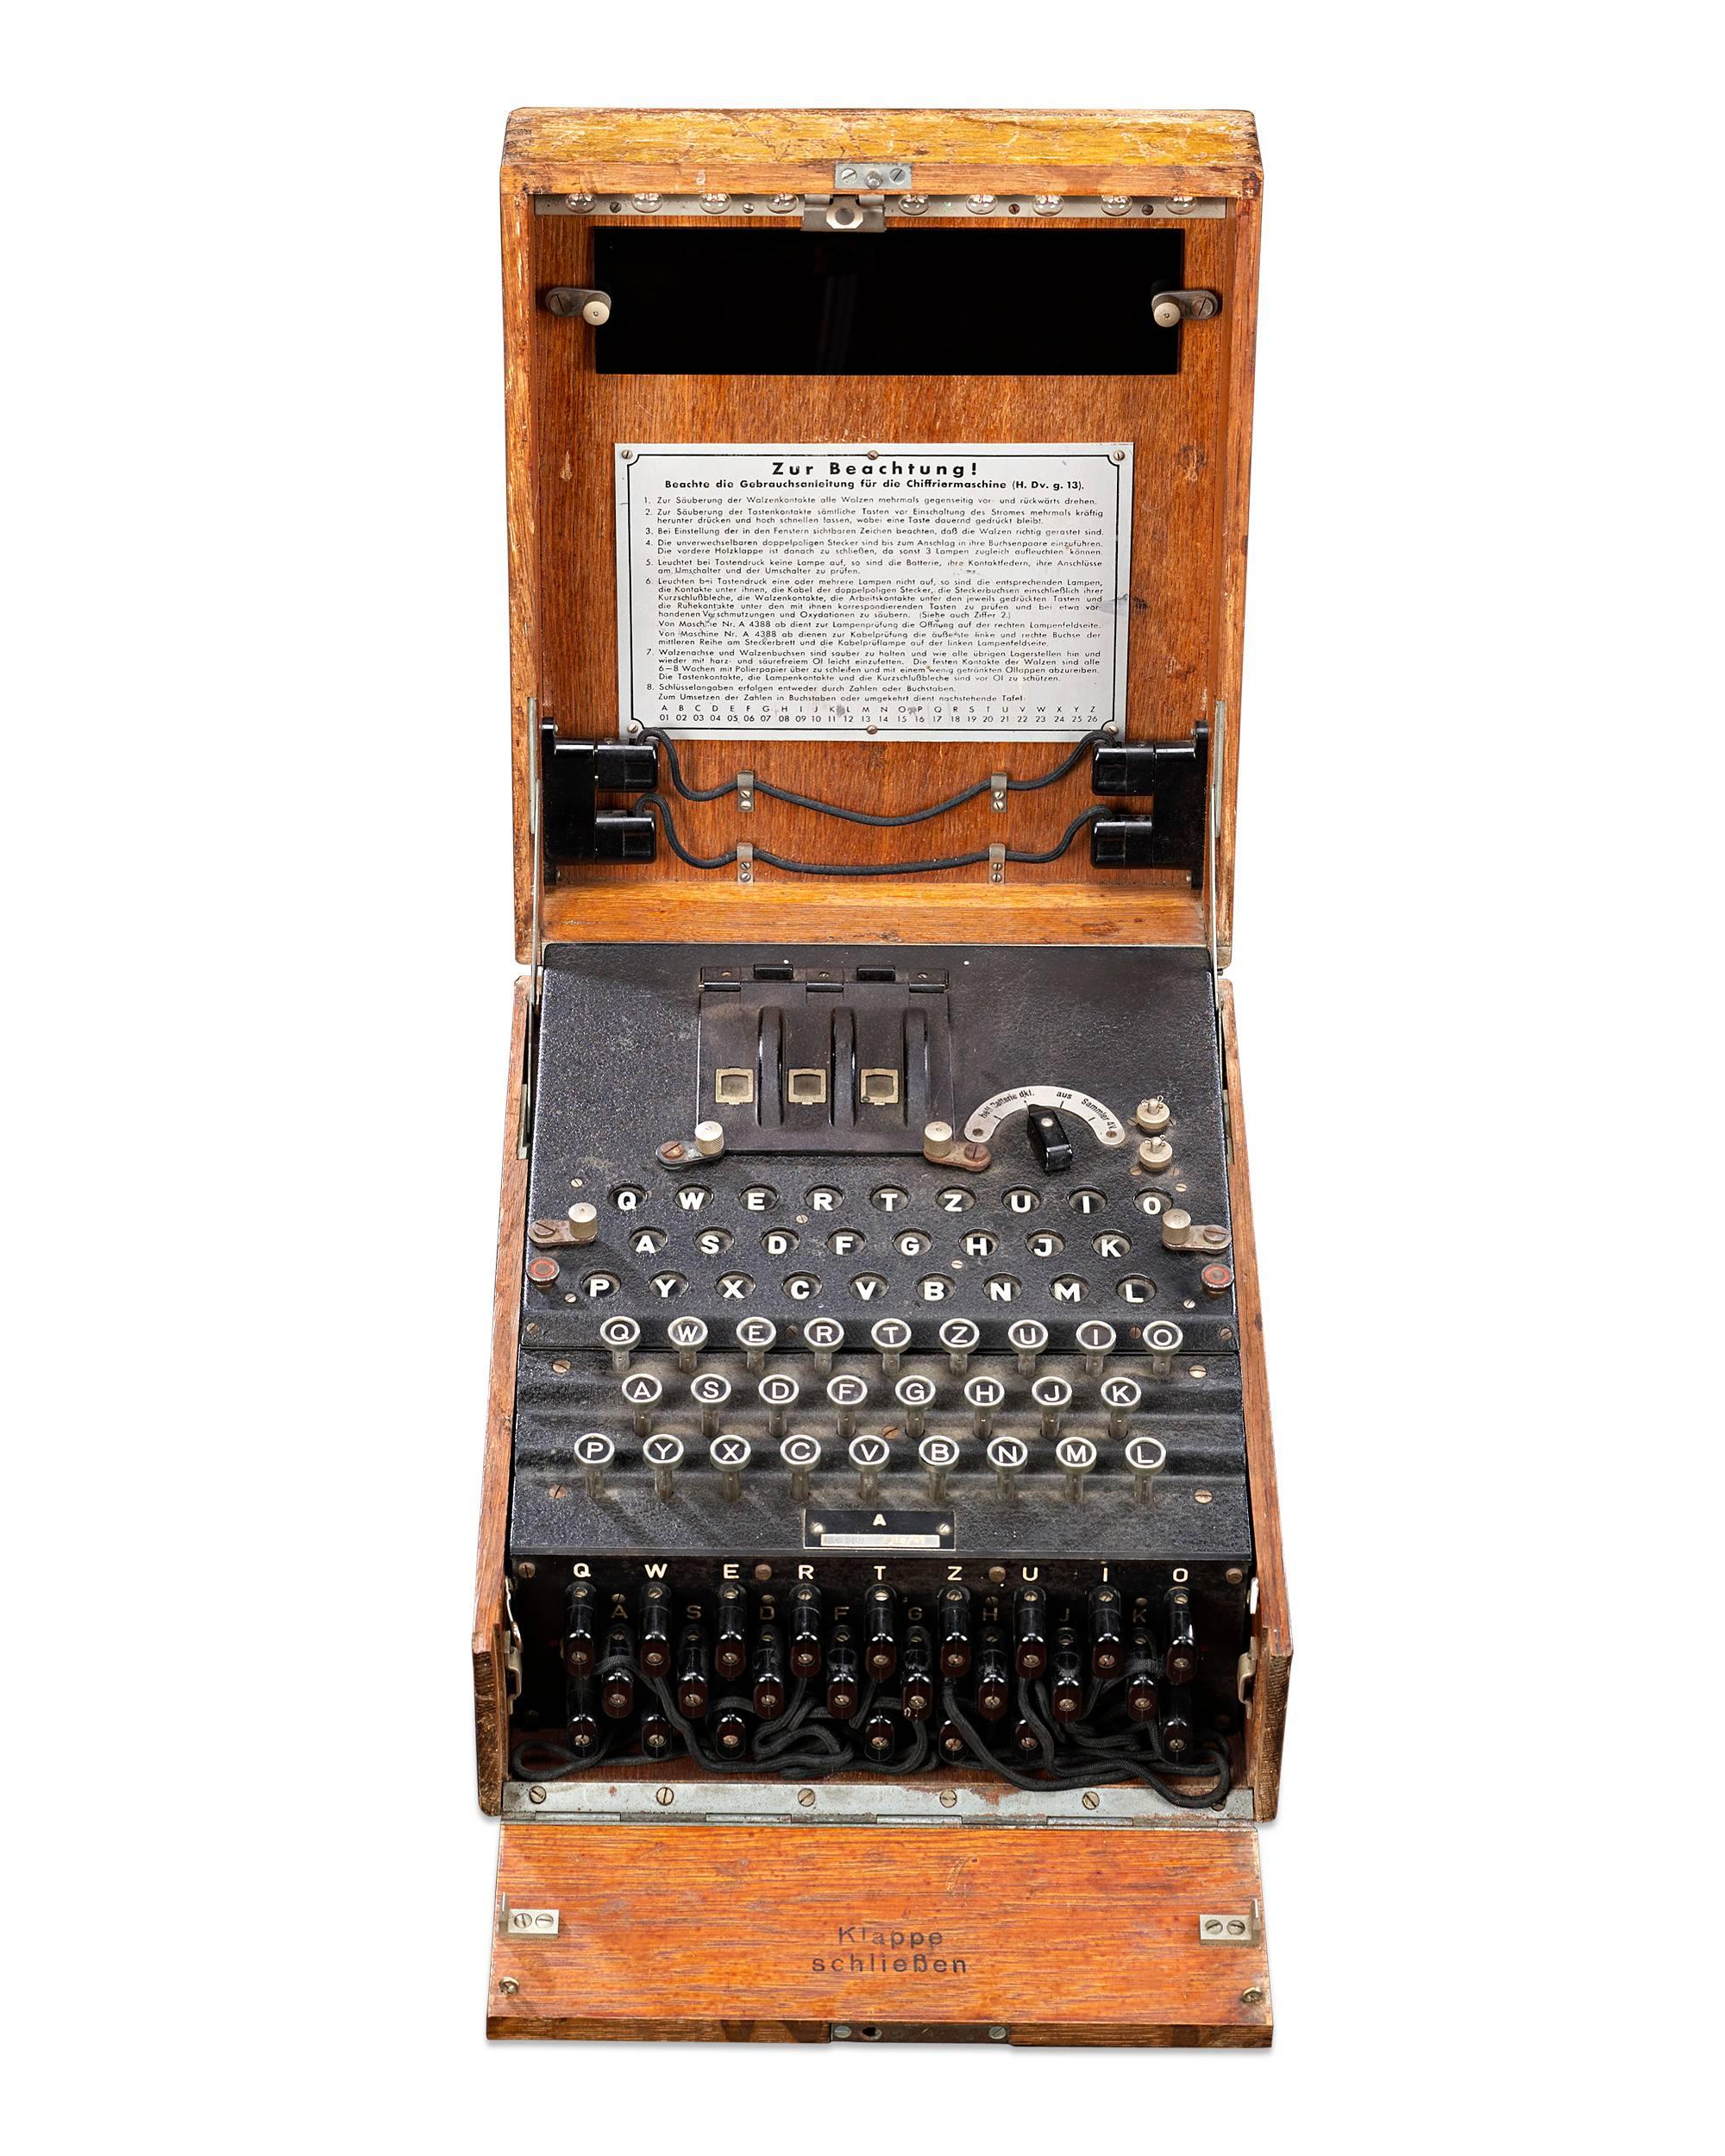 This highly important three-rotor Enigma I machine was used by the German Army during World War II. This machine, manufactured in Berlin, features three moving code rotors, or 